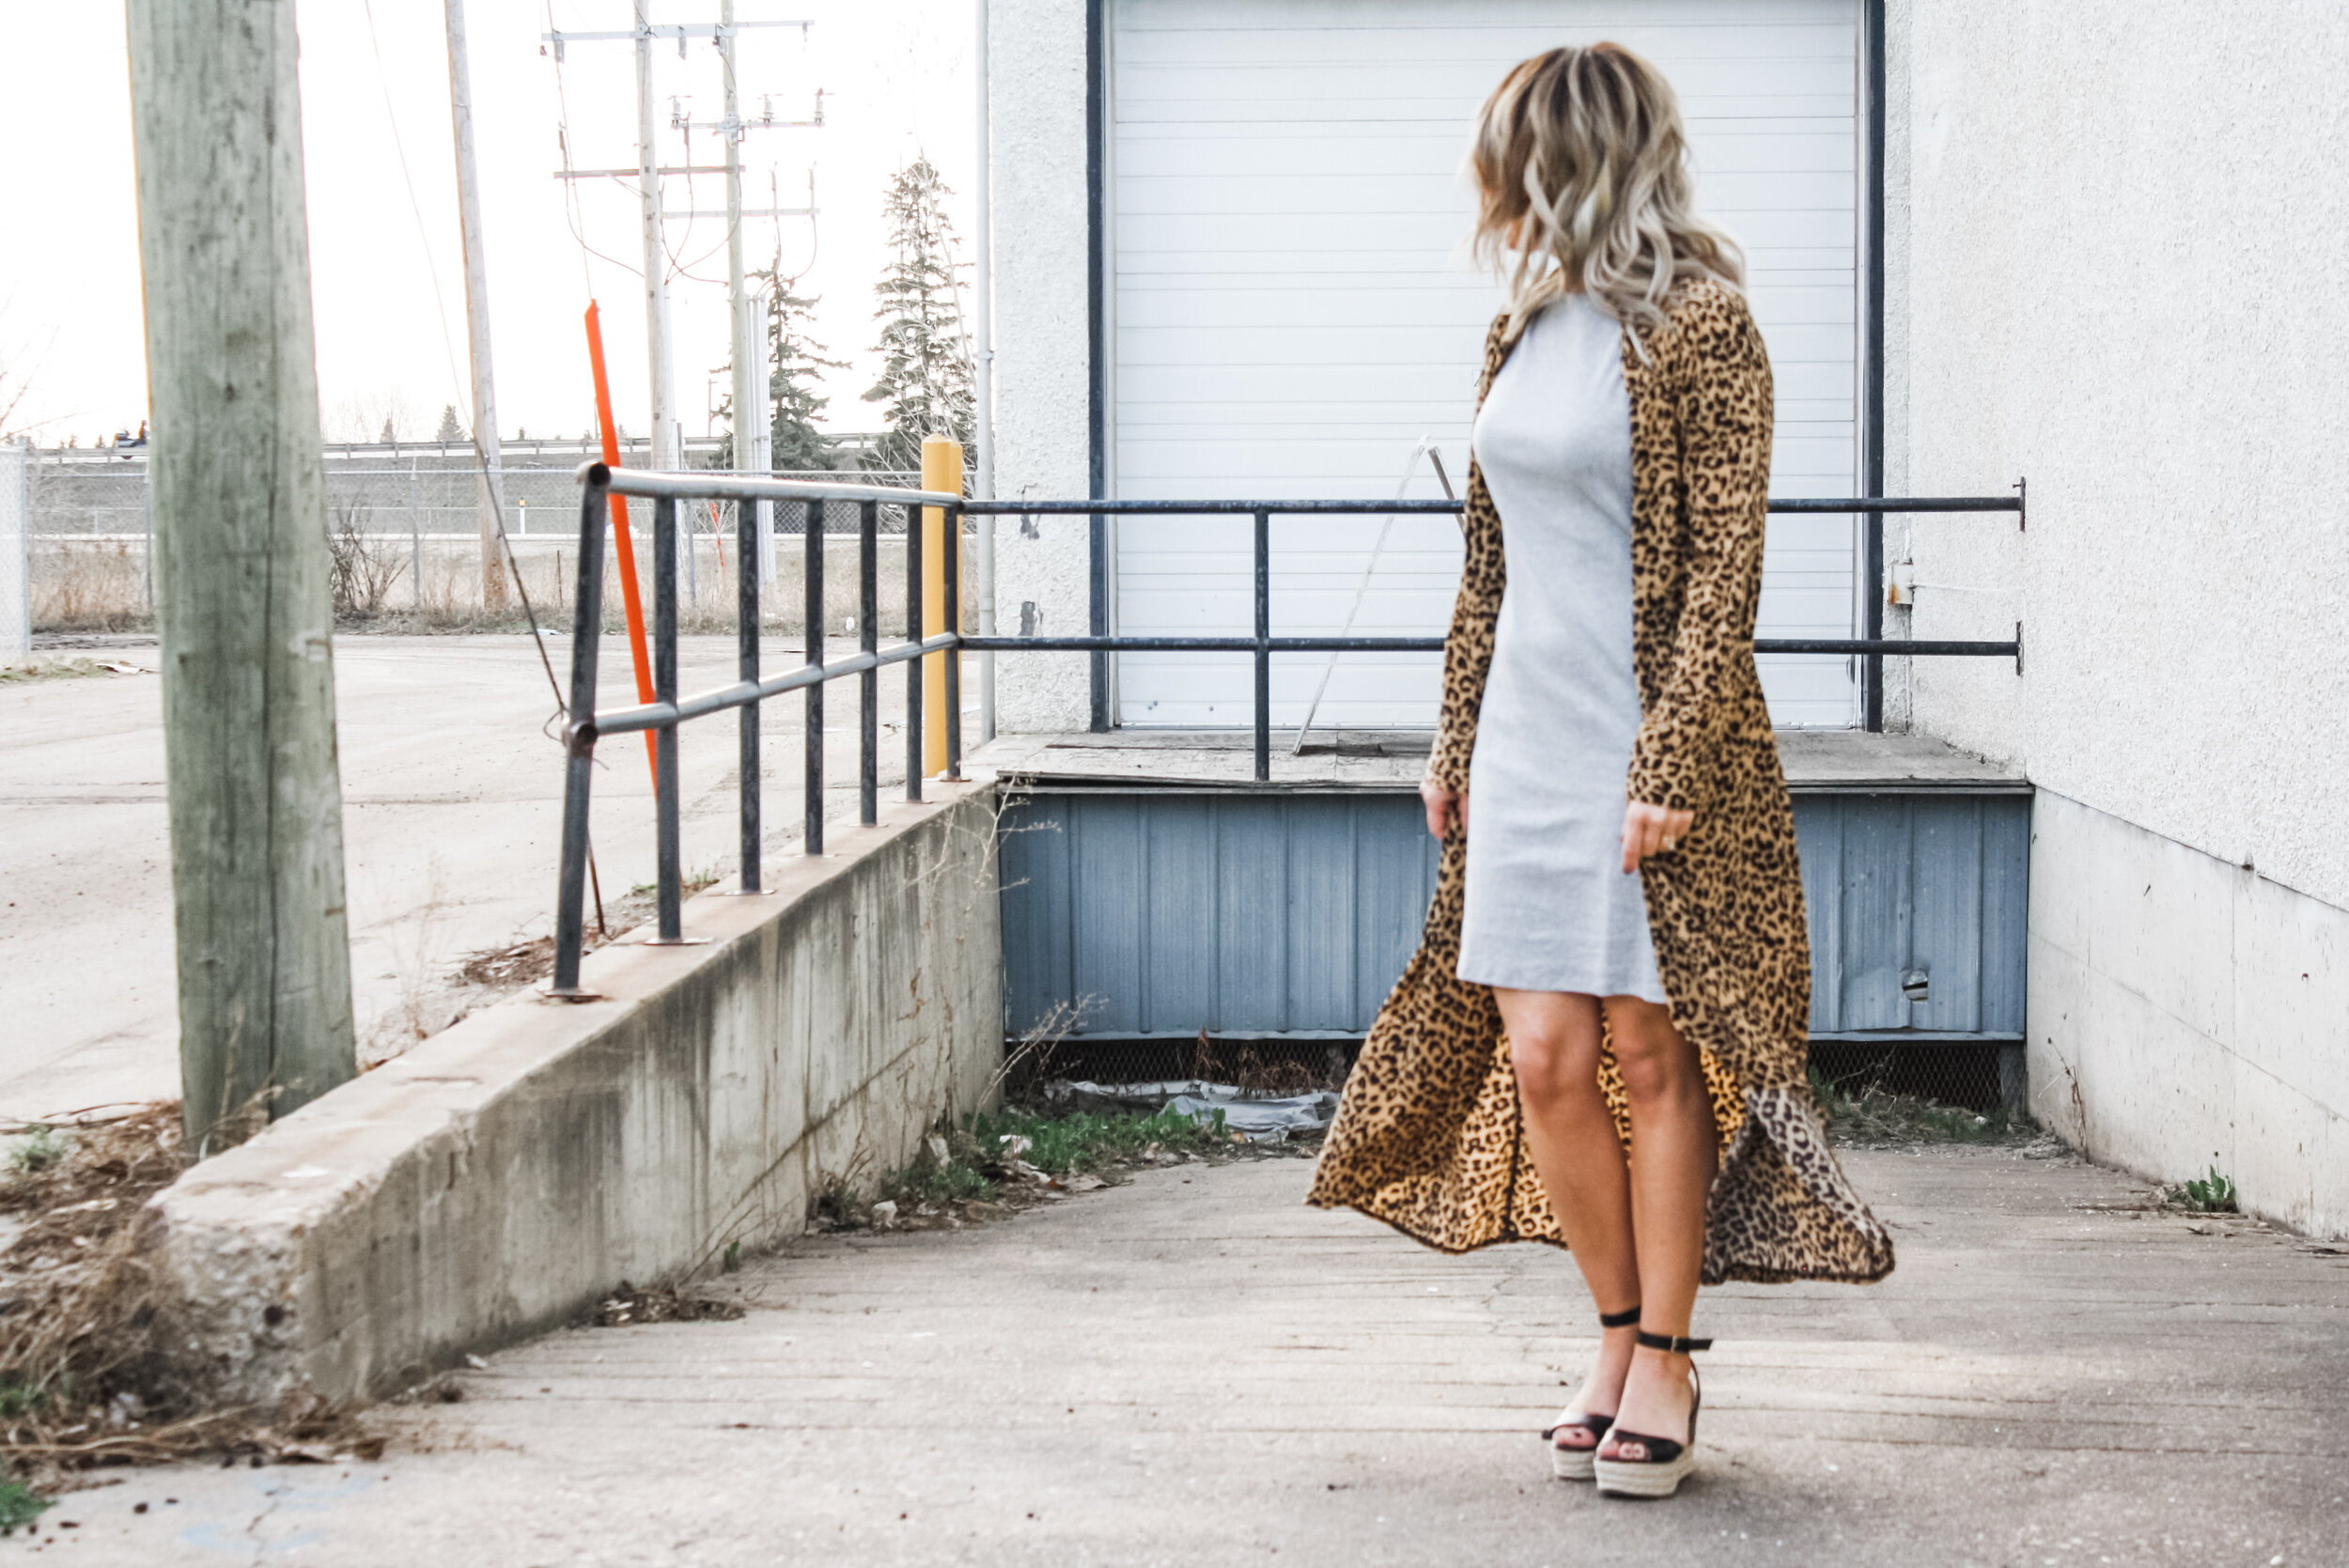 WRAP DRESS STYLED AS A DUSTER + DRESS + FLAT FORM WEDGES